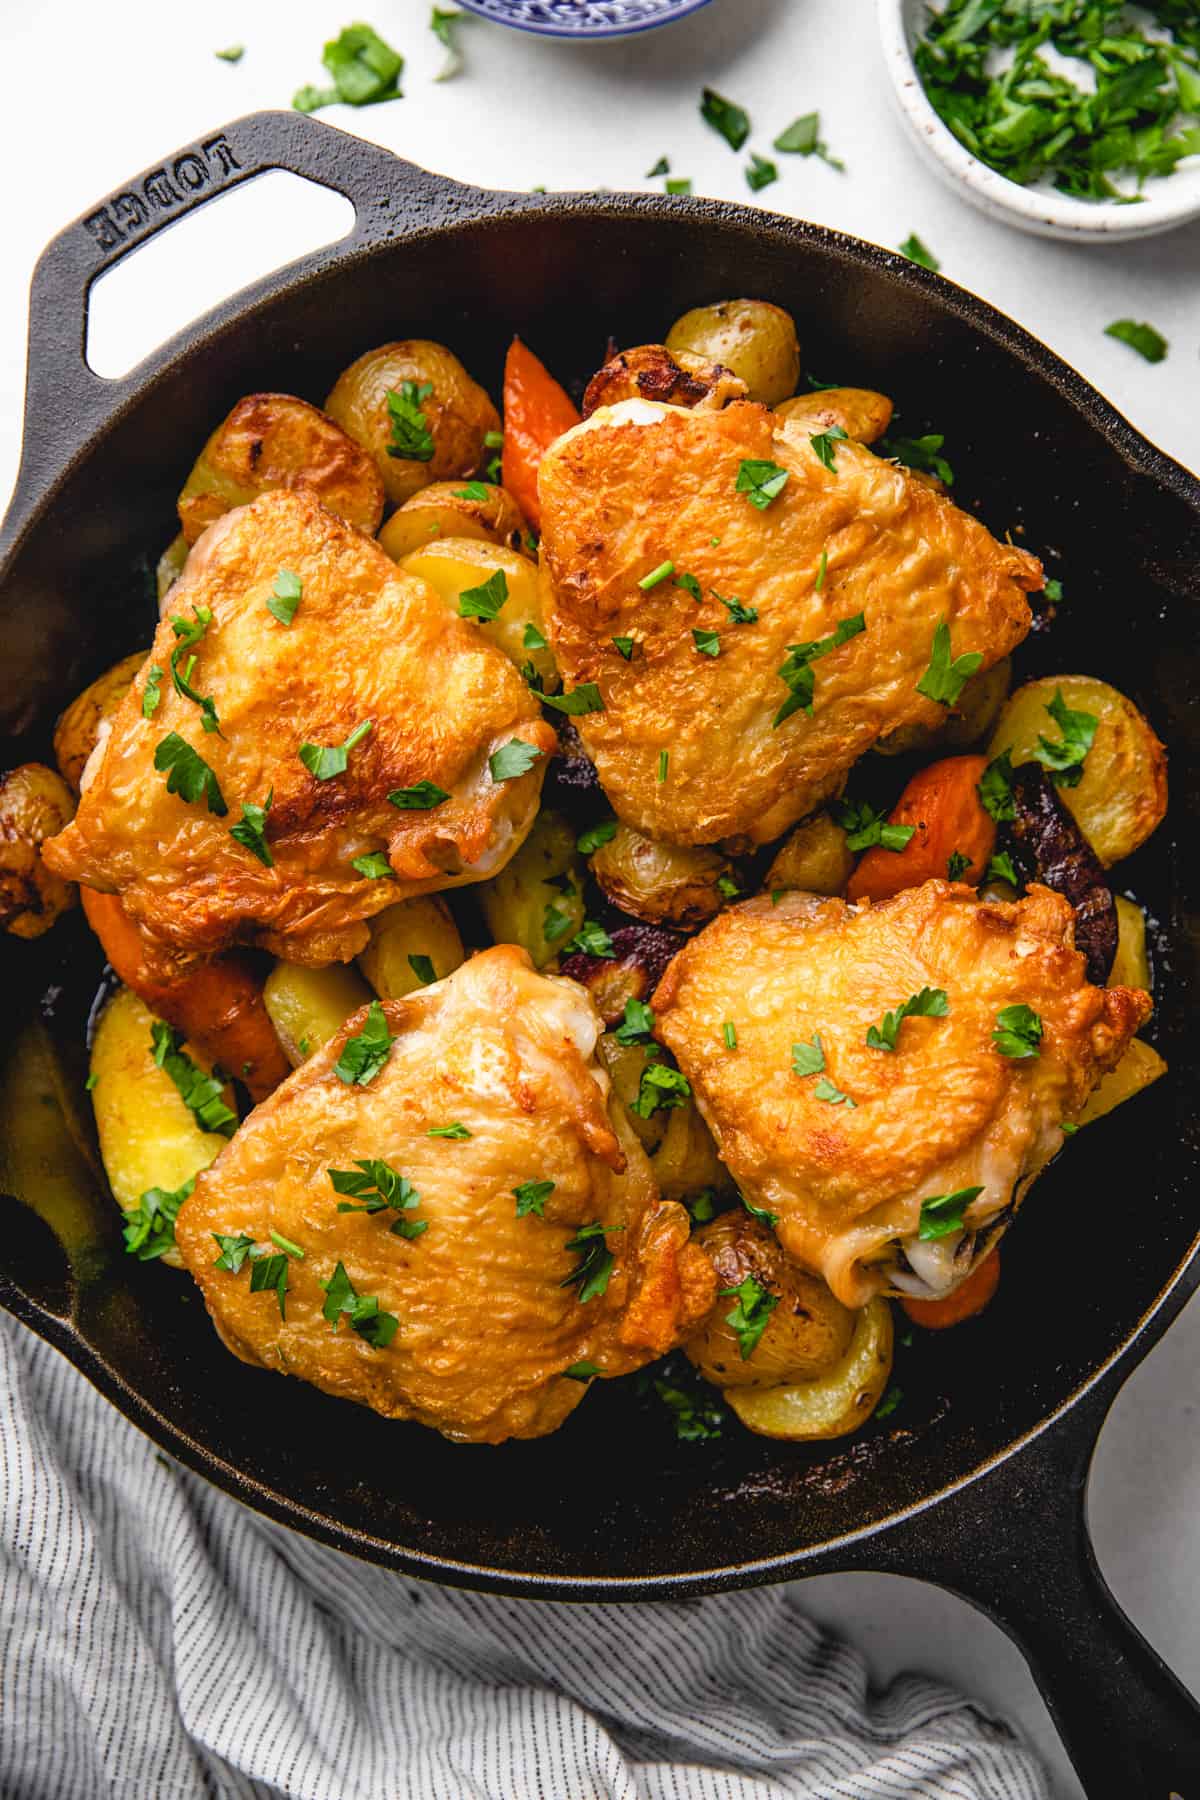 Roasted chicken thighs over vegetables in a cast iron skillet.